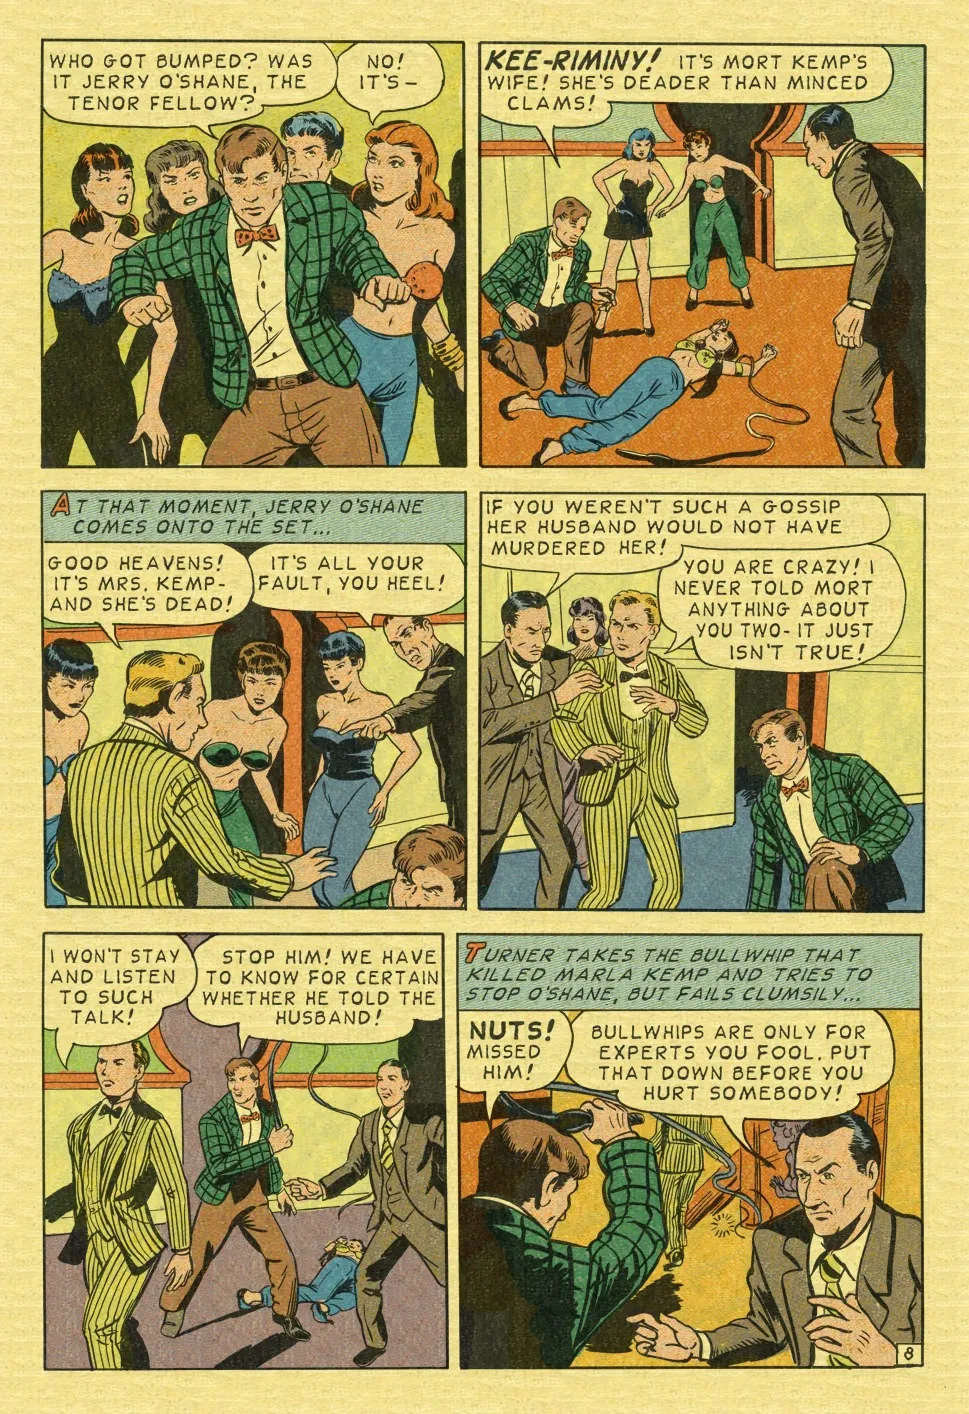 Crime Smashers! 2- The Wertham Files - Page 19